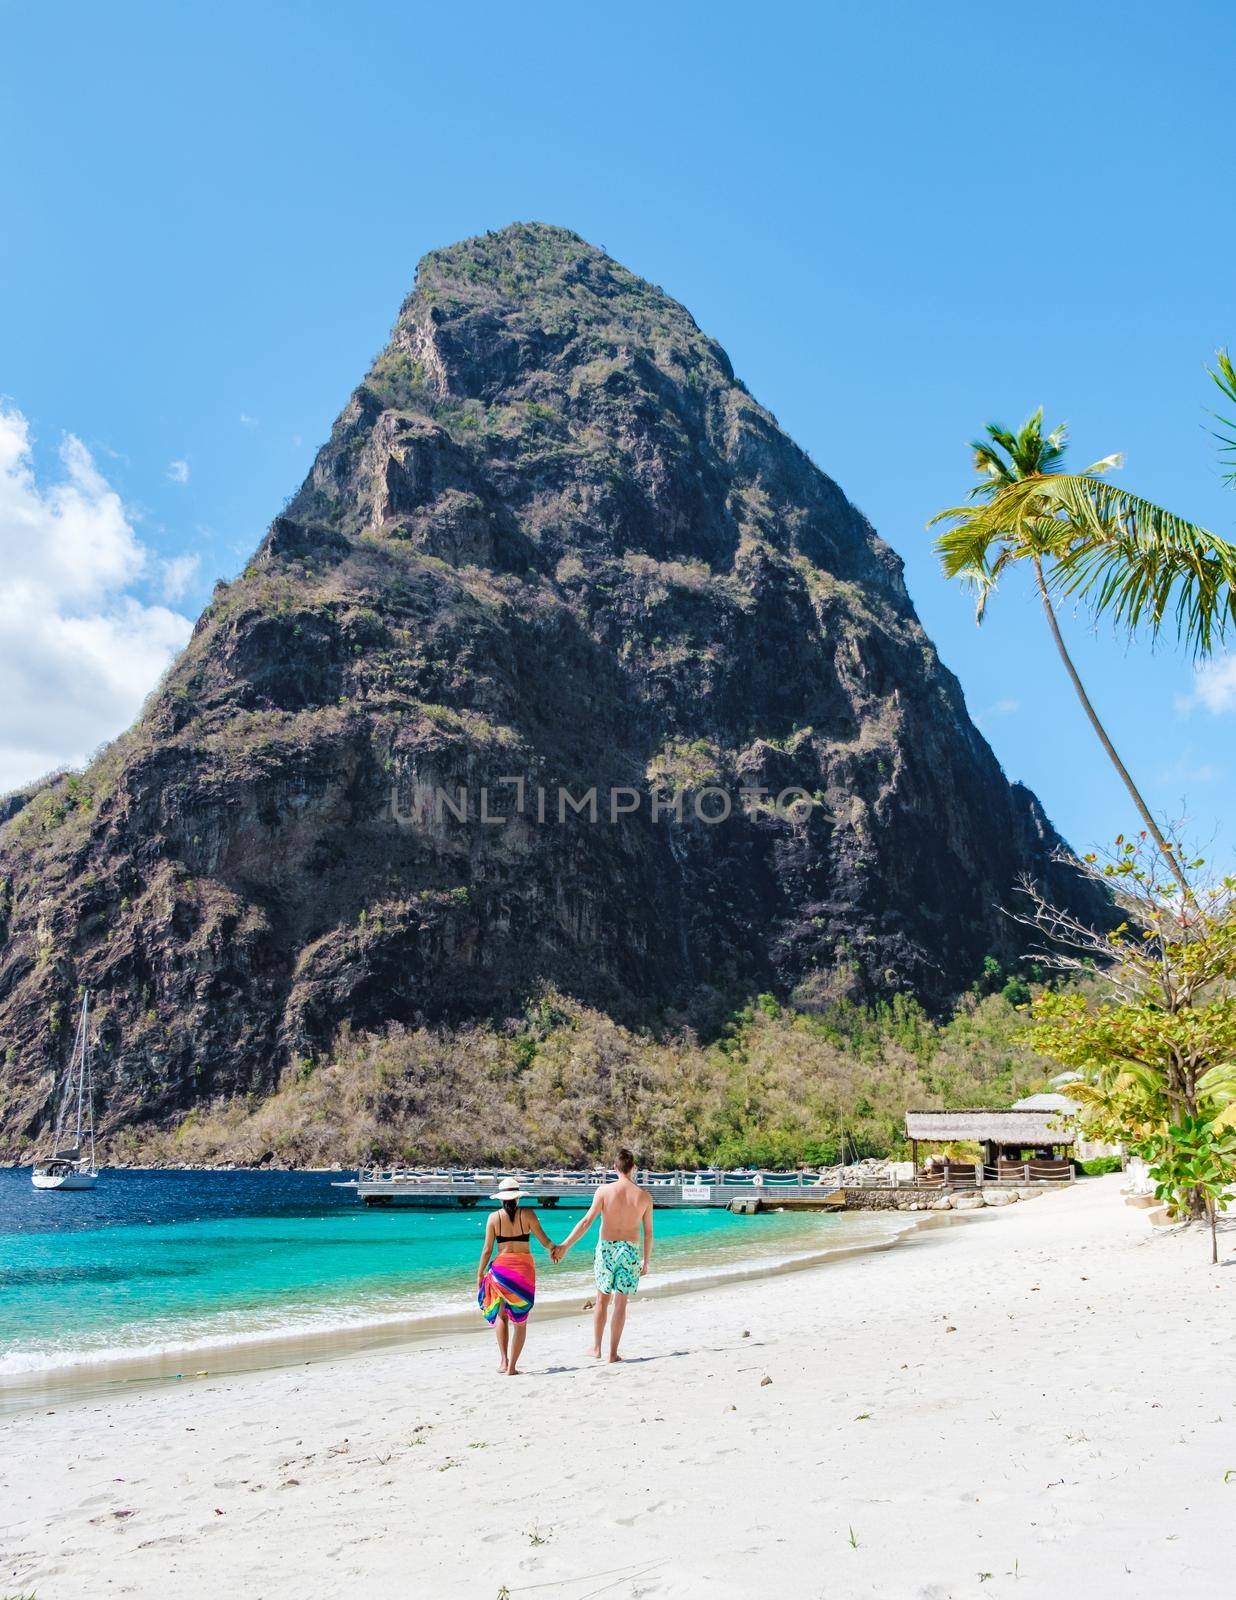 couple walking on the beach during summer vacation on a sunny day, men and woman on vacation at the tropical Island of Saint Lucia Caribbean. Sugar beach St Lucia Caribbean